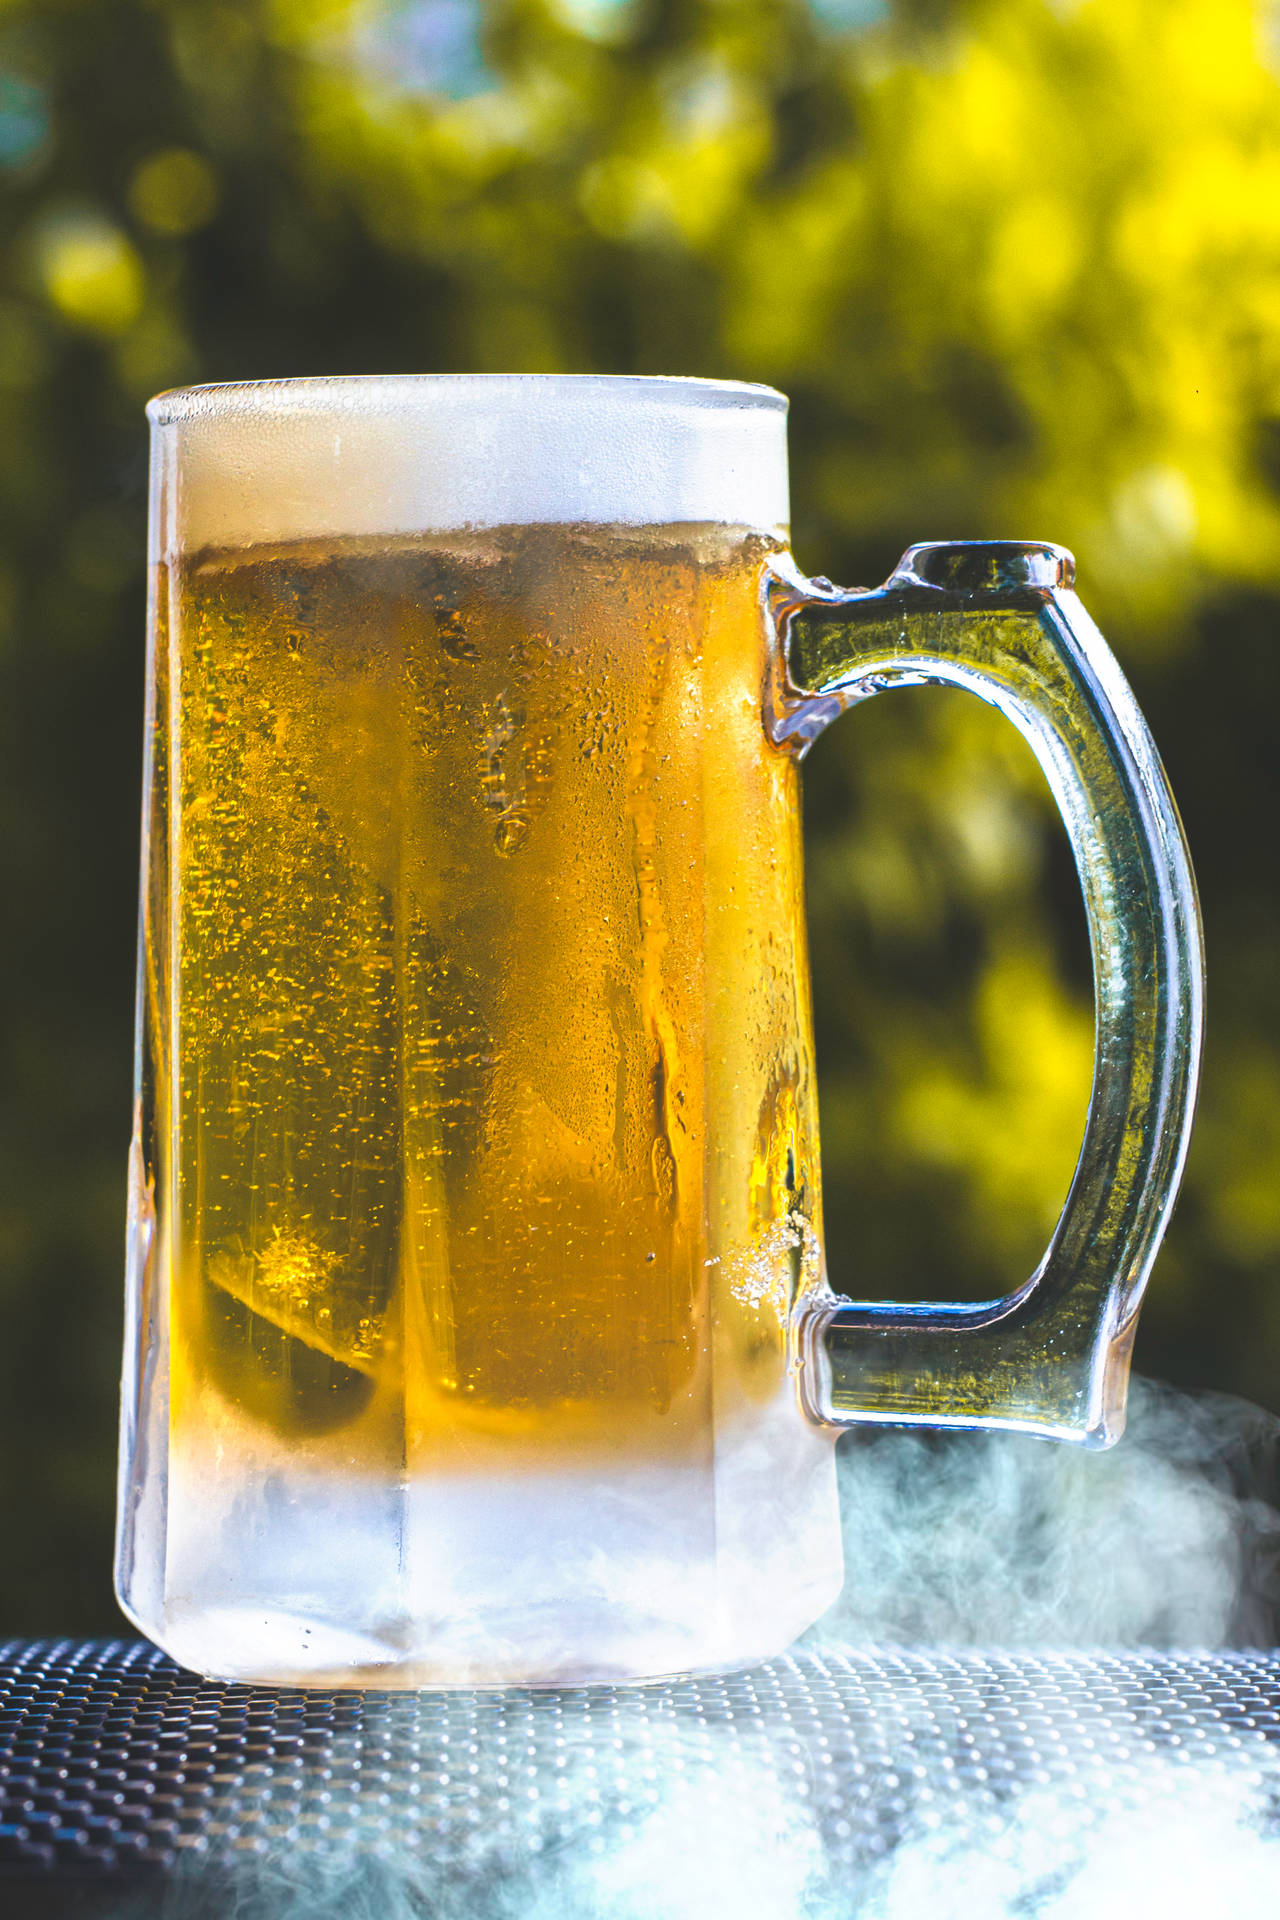 Clear Mug With Beer